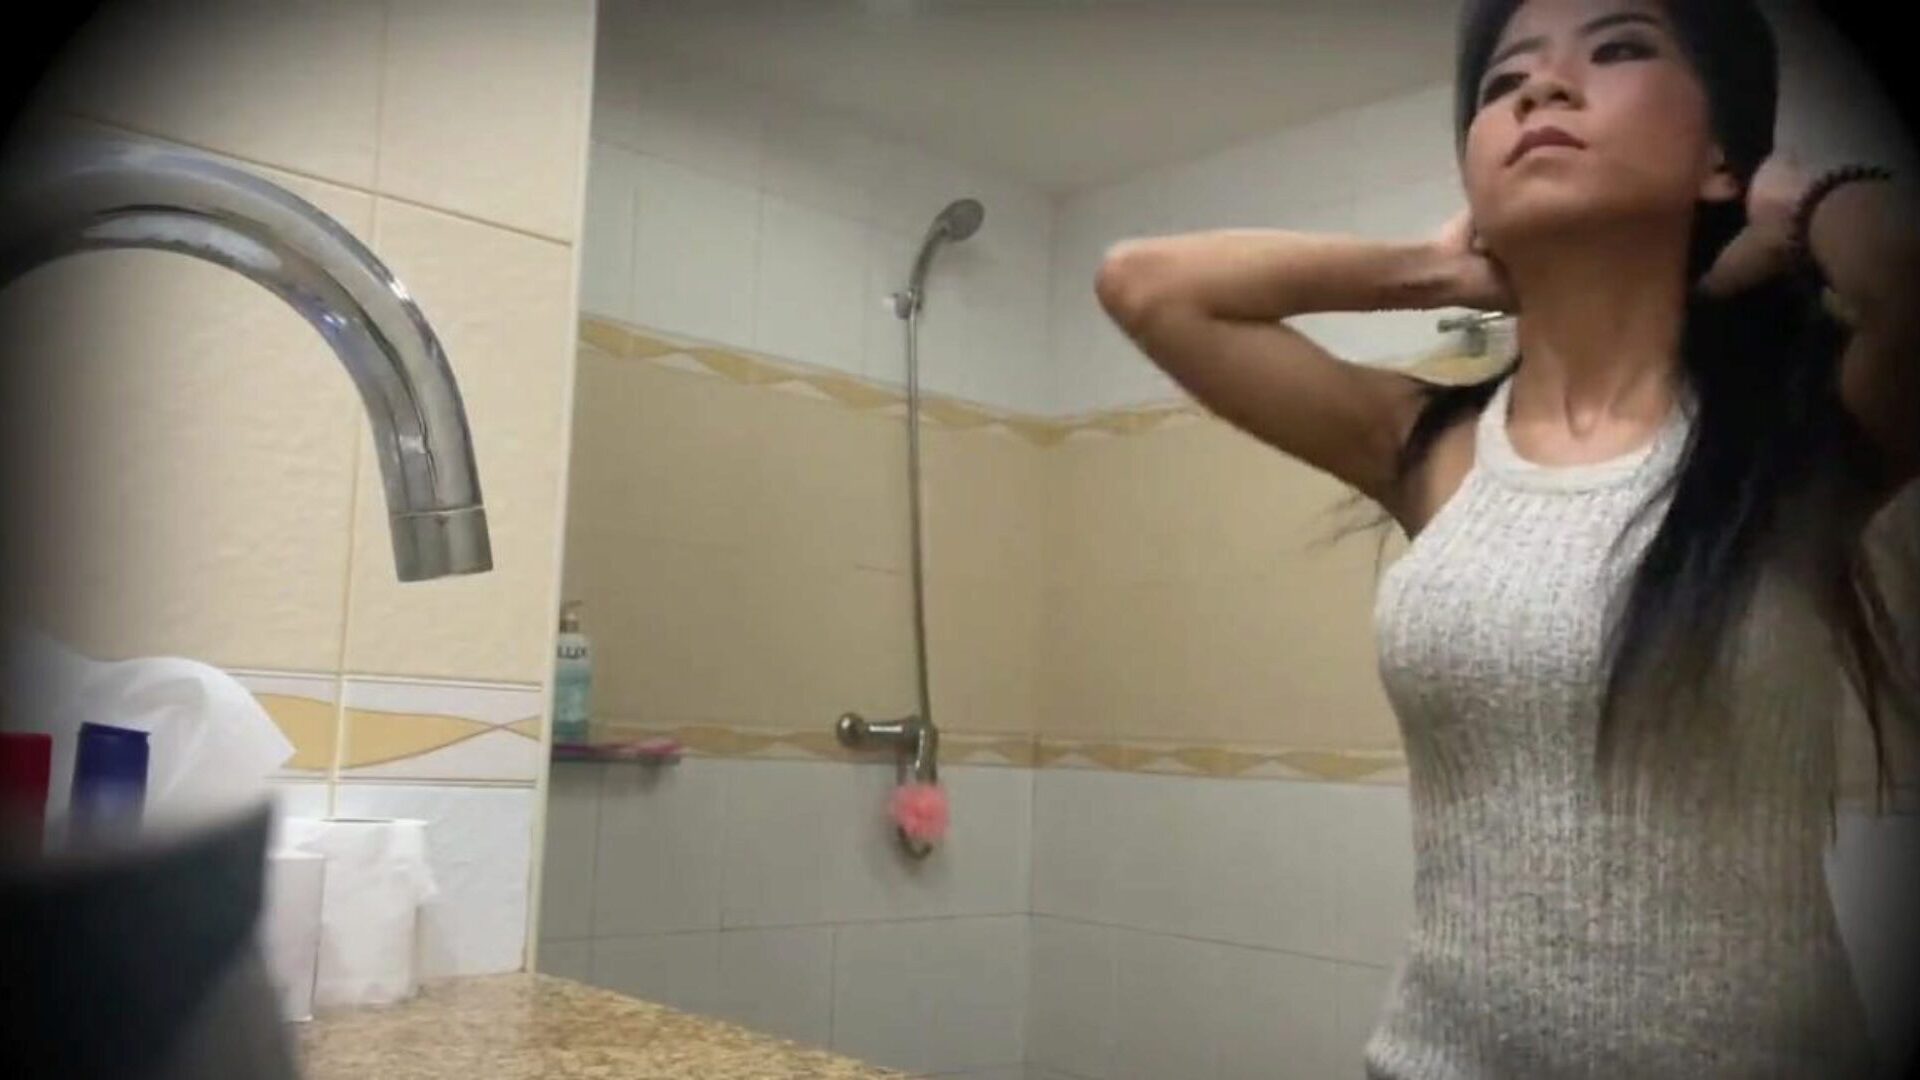 Gorgeous Thai Prostitute Fucked on Hidden Camera: Porn bf Watch Gorgeous Thai Prostitute Fucked on Hidden Camera video on xHamster - the ultimate selection of free-for-all Asian Teen HD gonzo porno tube videos